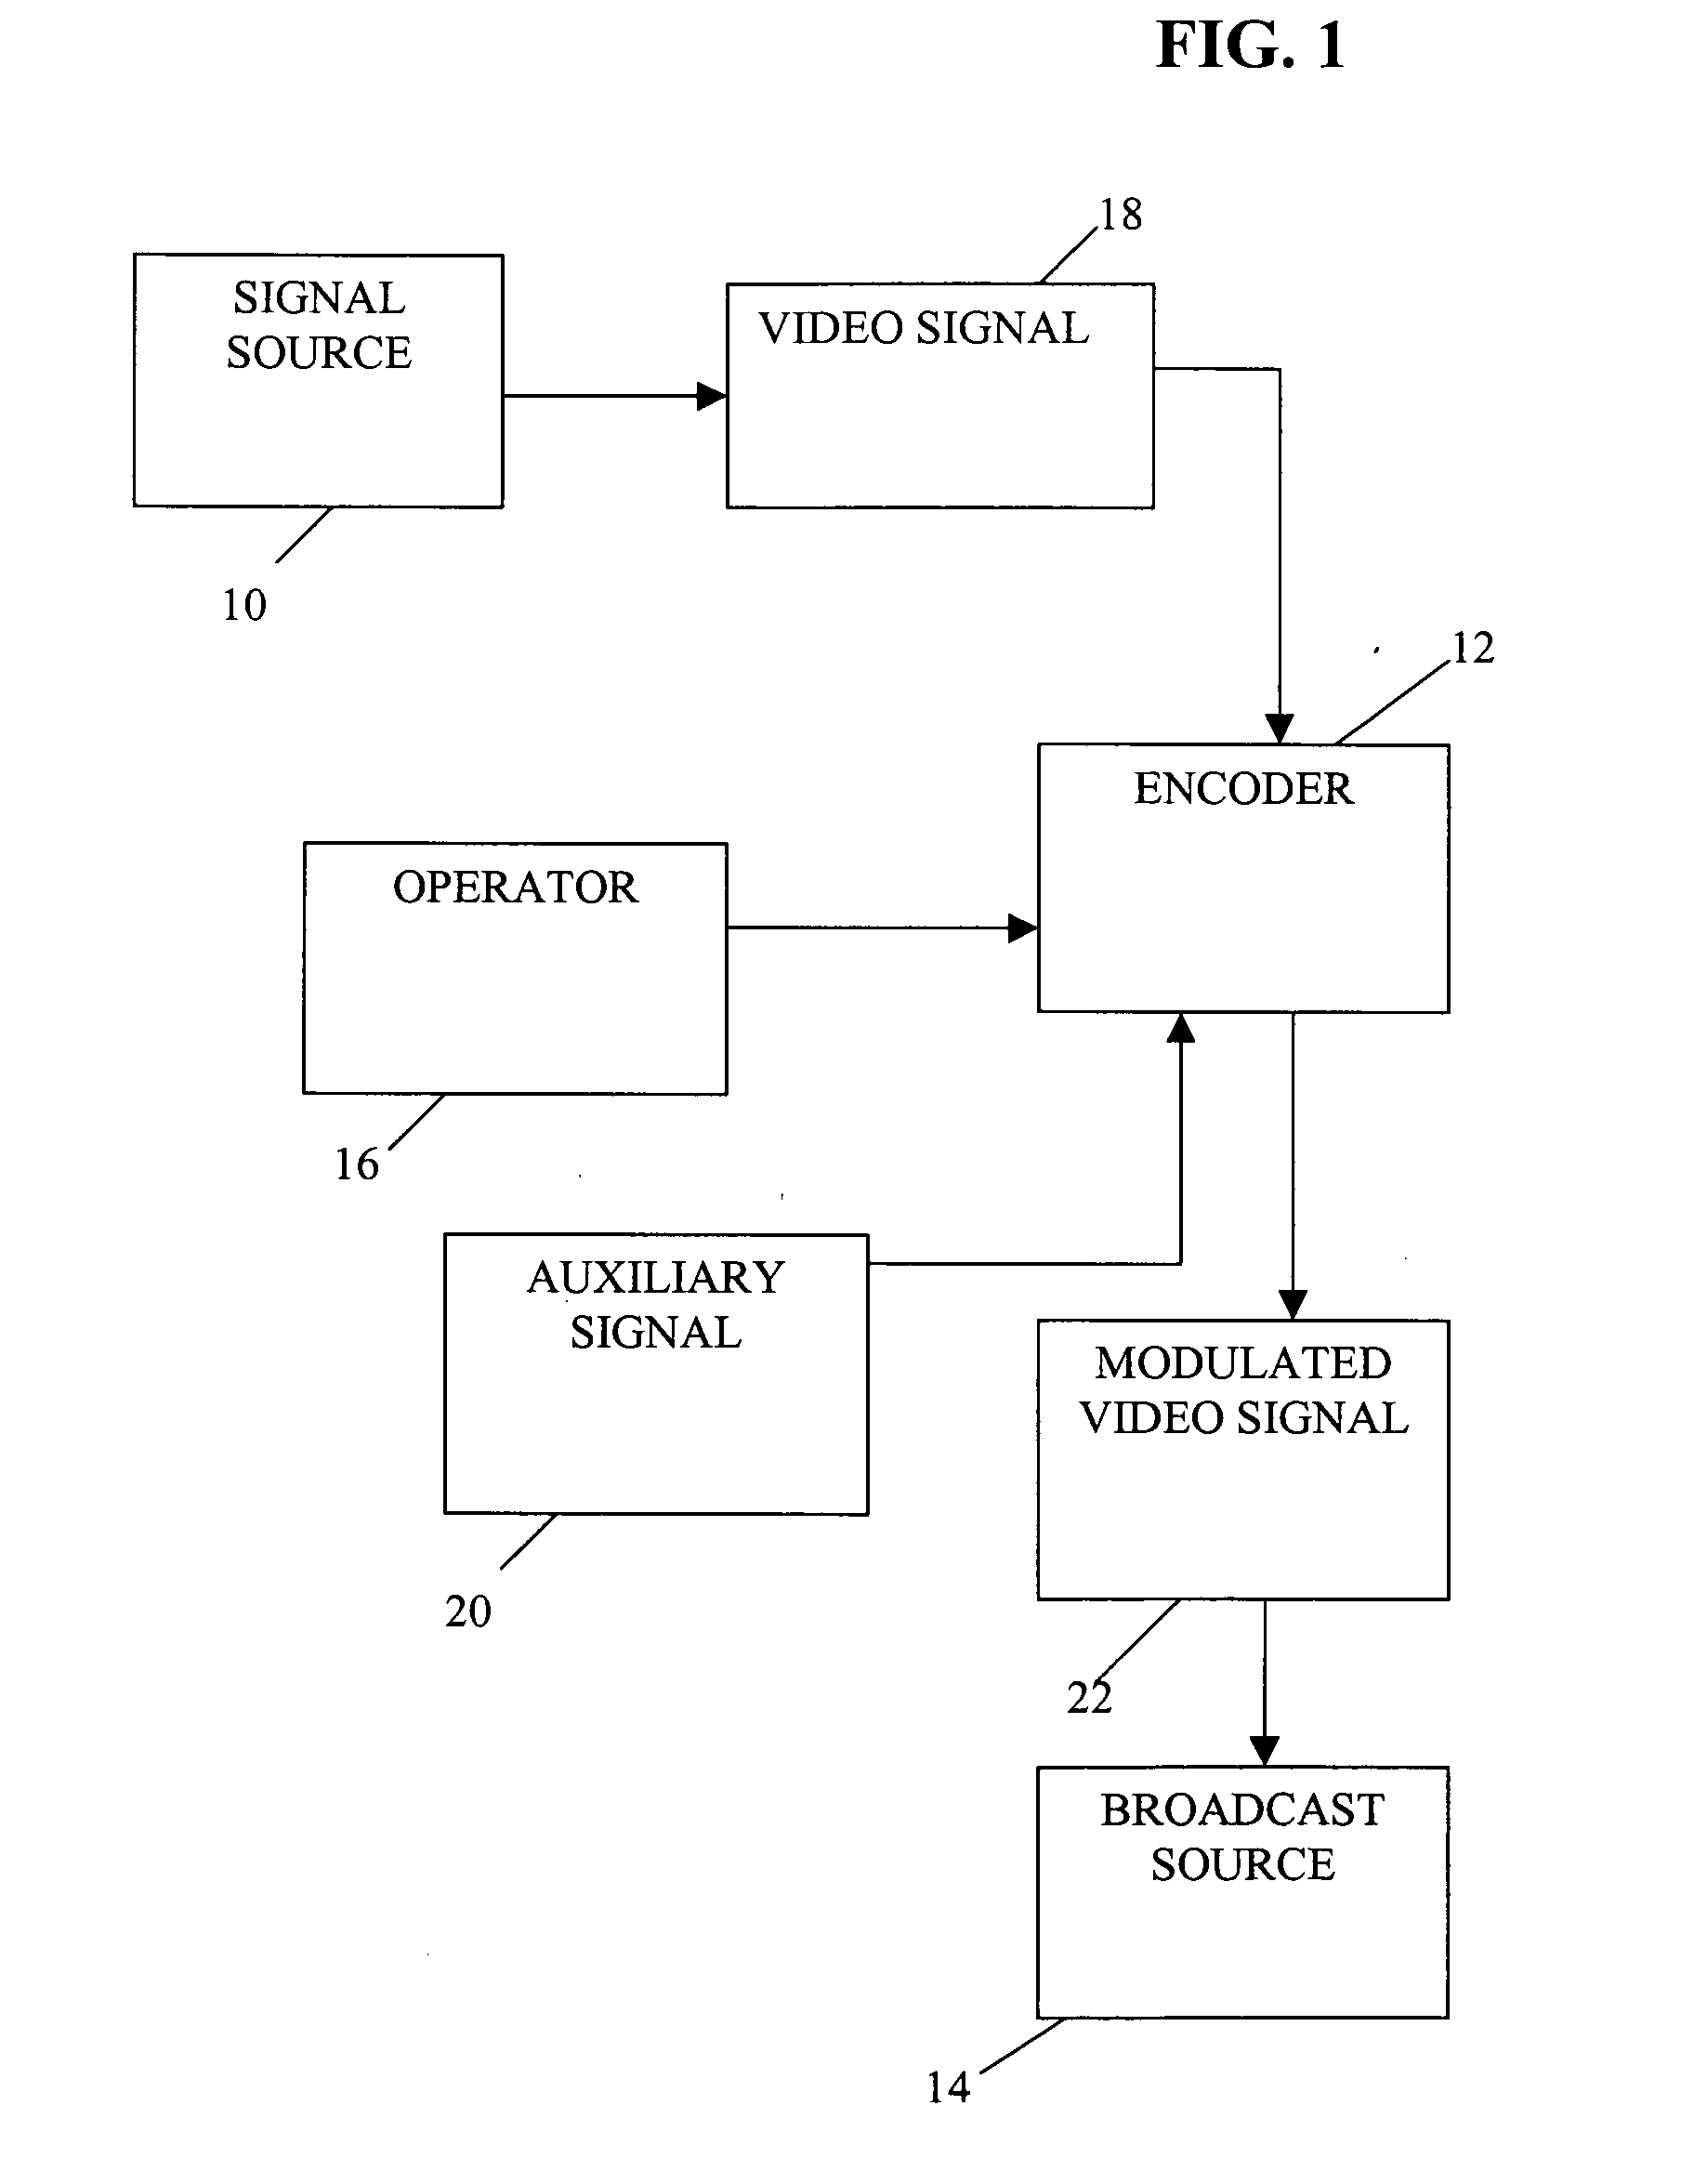 Methods for improved modulation of video signals